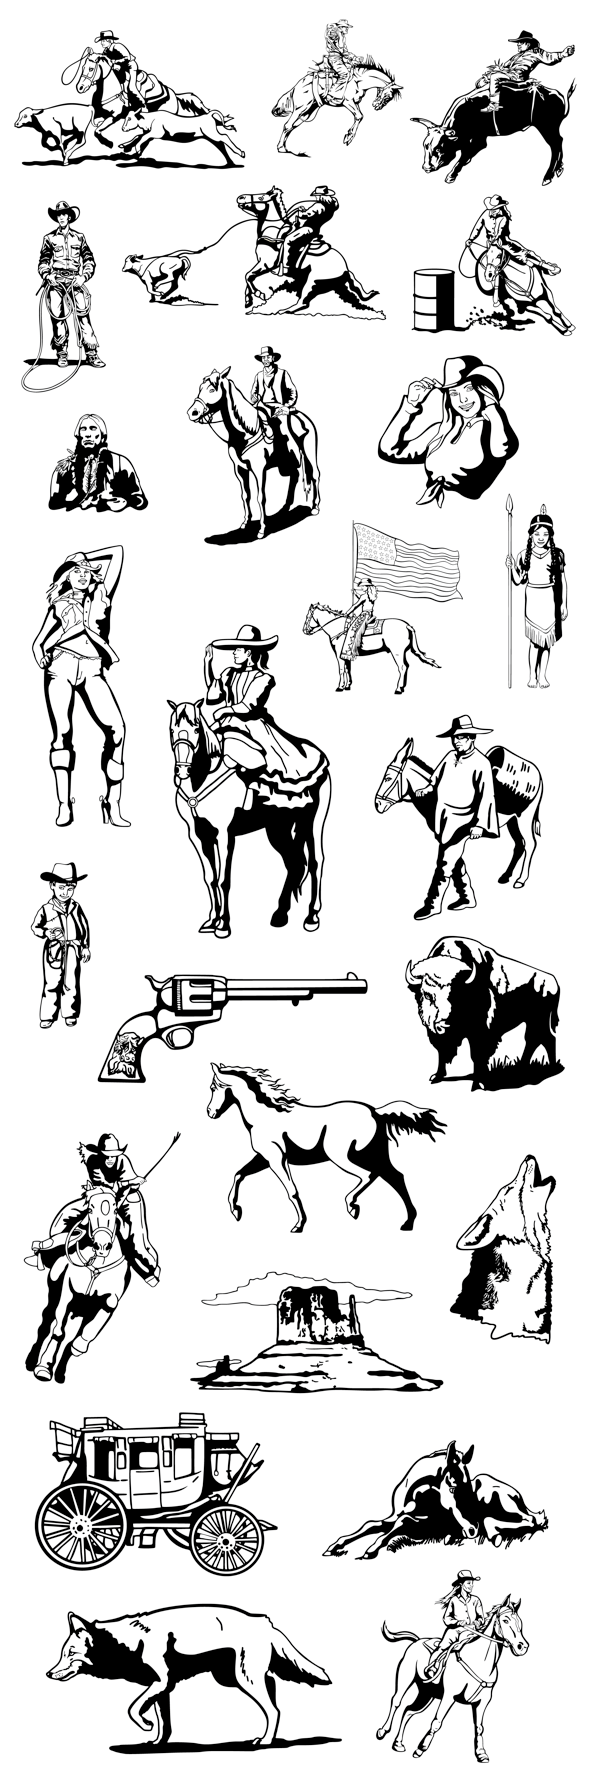 Western and Rodeo Art BW Samples